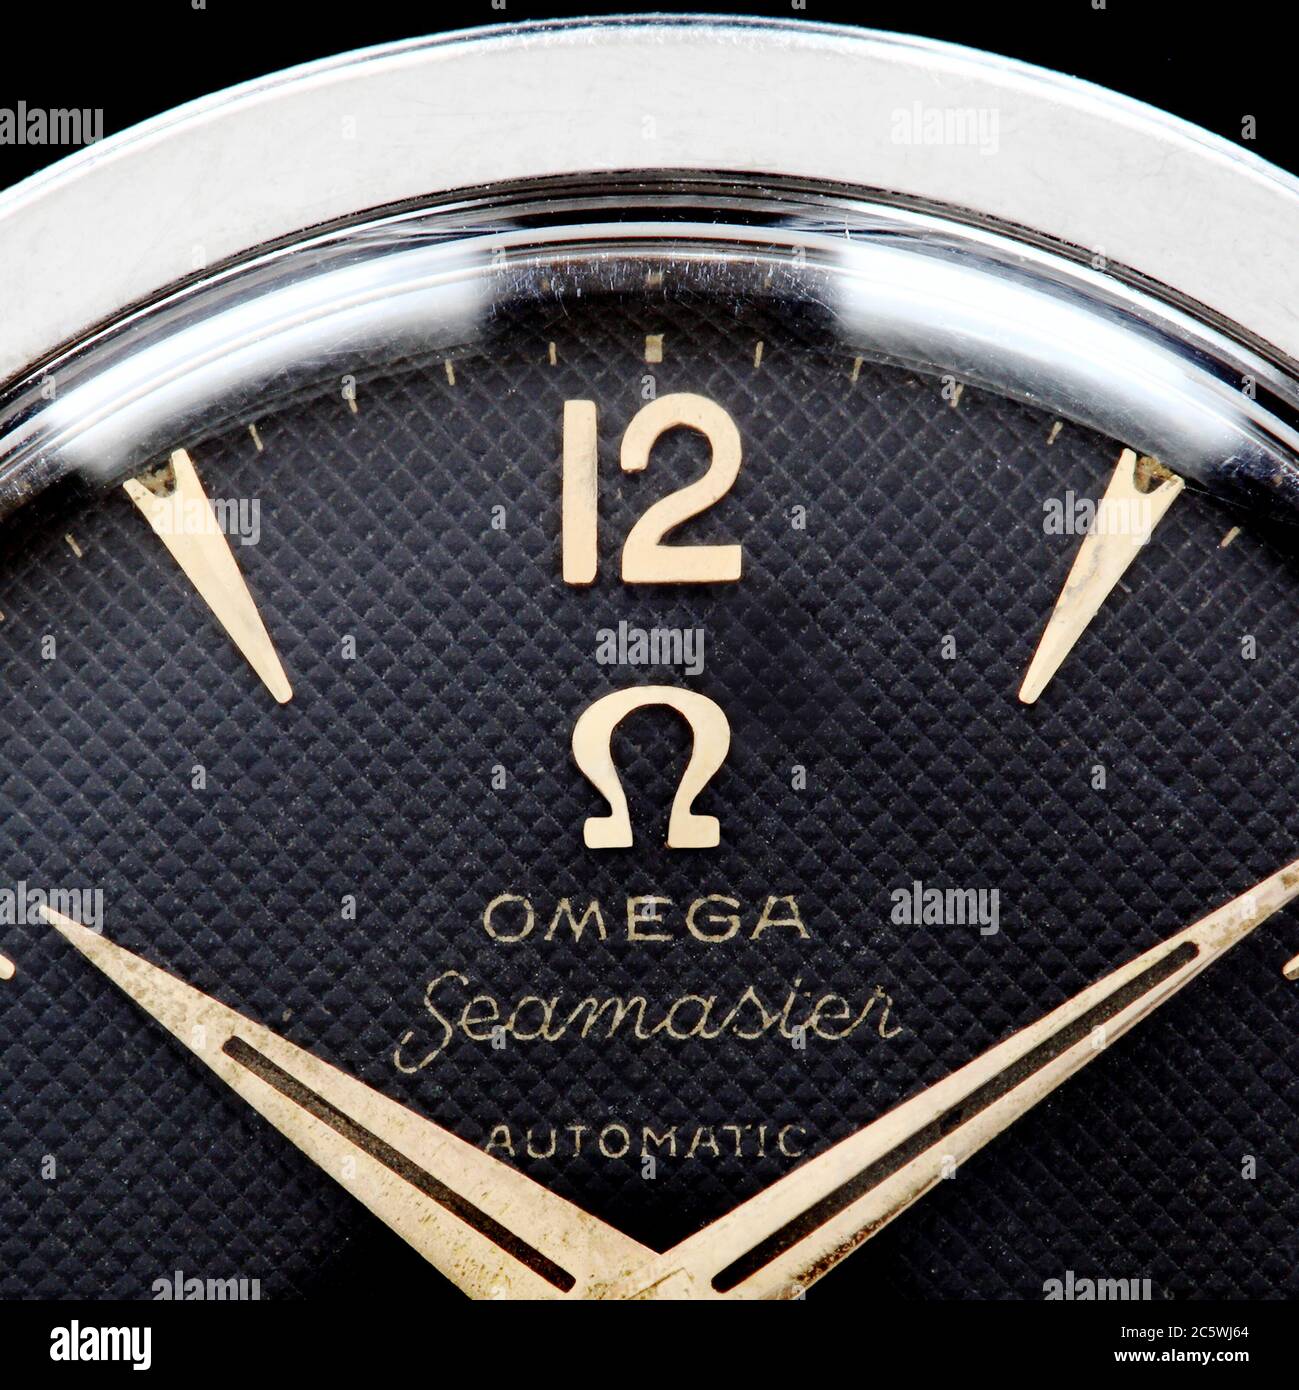 Vintage 1950s Omega Seamaster Omega logo, symbol or trademark on a honeycomb or waffle dial watch. Omega watchmaking company wristwatch. Stock Photo